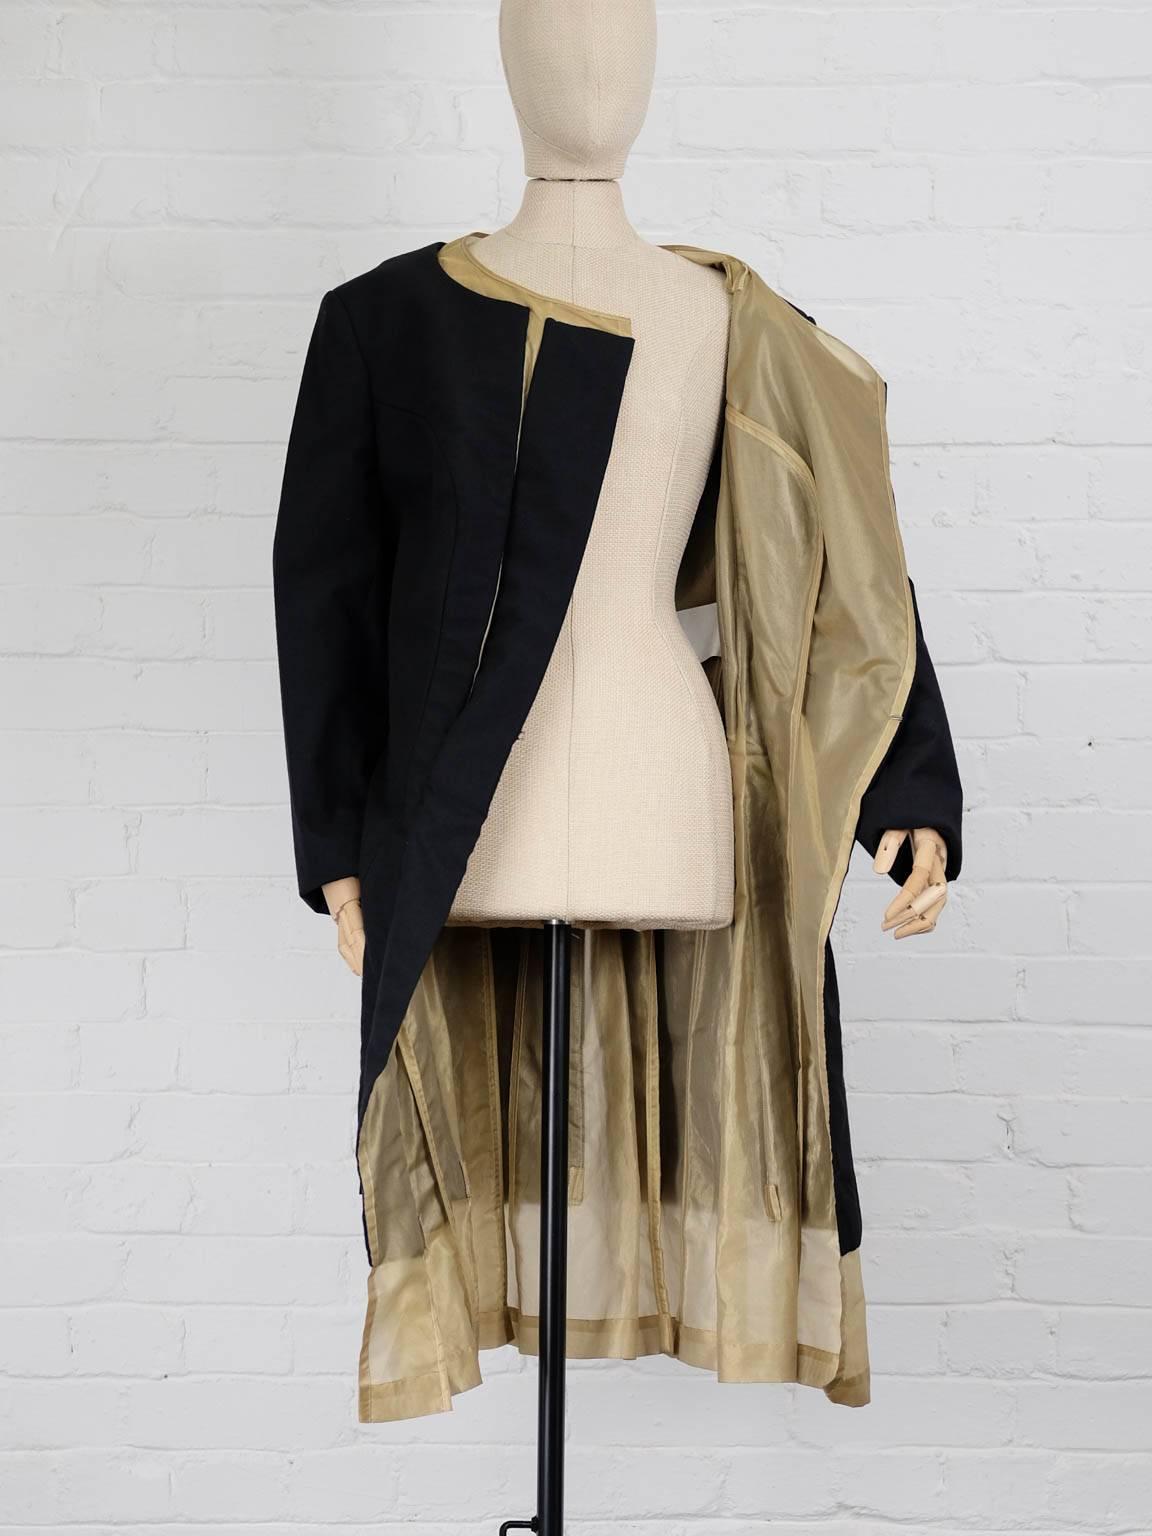 1997 COMME des GARÇONS Rei Kawakubo black and gold layered coat jacket In Excellent Condition In London, GB